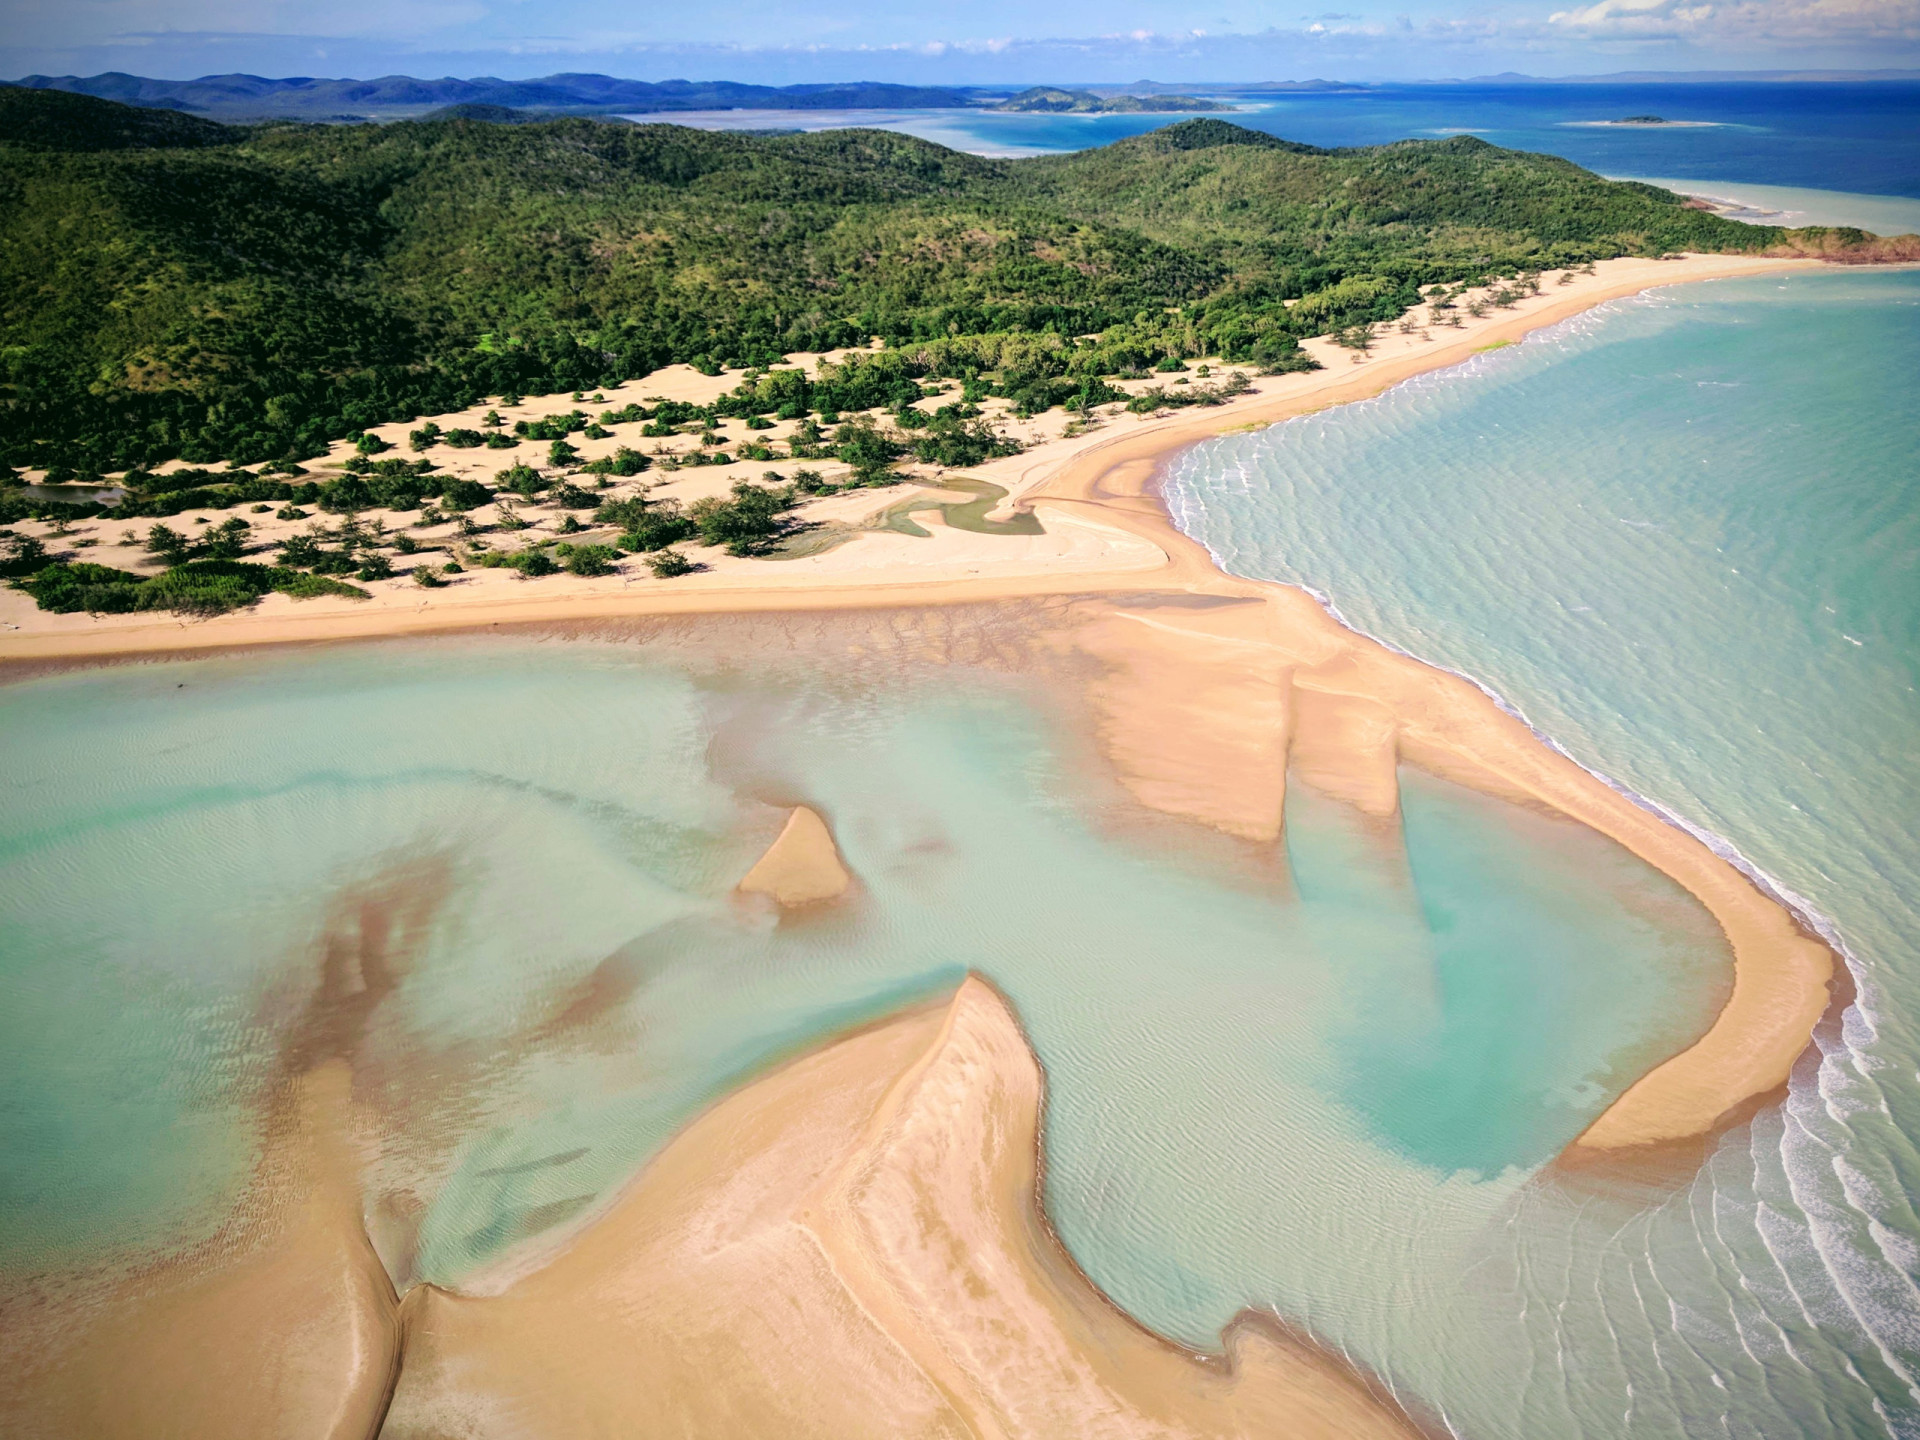 <p>The Torres Strait is the strip of sea between Cape York and Papua New Guinea. Here, you'll find more than 200 islands home to groups of people with unique cultures, languages, and traditions that are distinct from mainland Aboriginal groups.</p><p><a href="https://www.msn.com/en-us/community/channel/vid-7xx8mnucu55yw63we9va2gwr7uihbxwc68fxqp25x6tg4ftibpra?cvid=94631541bc0f4f89bfd59158d696ad7e">Follow us and access great exclusive content every day</a></p>